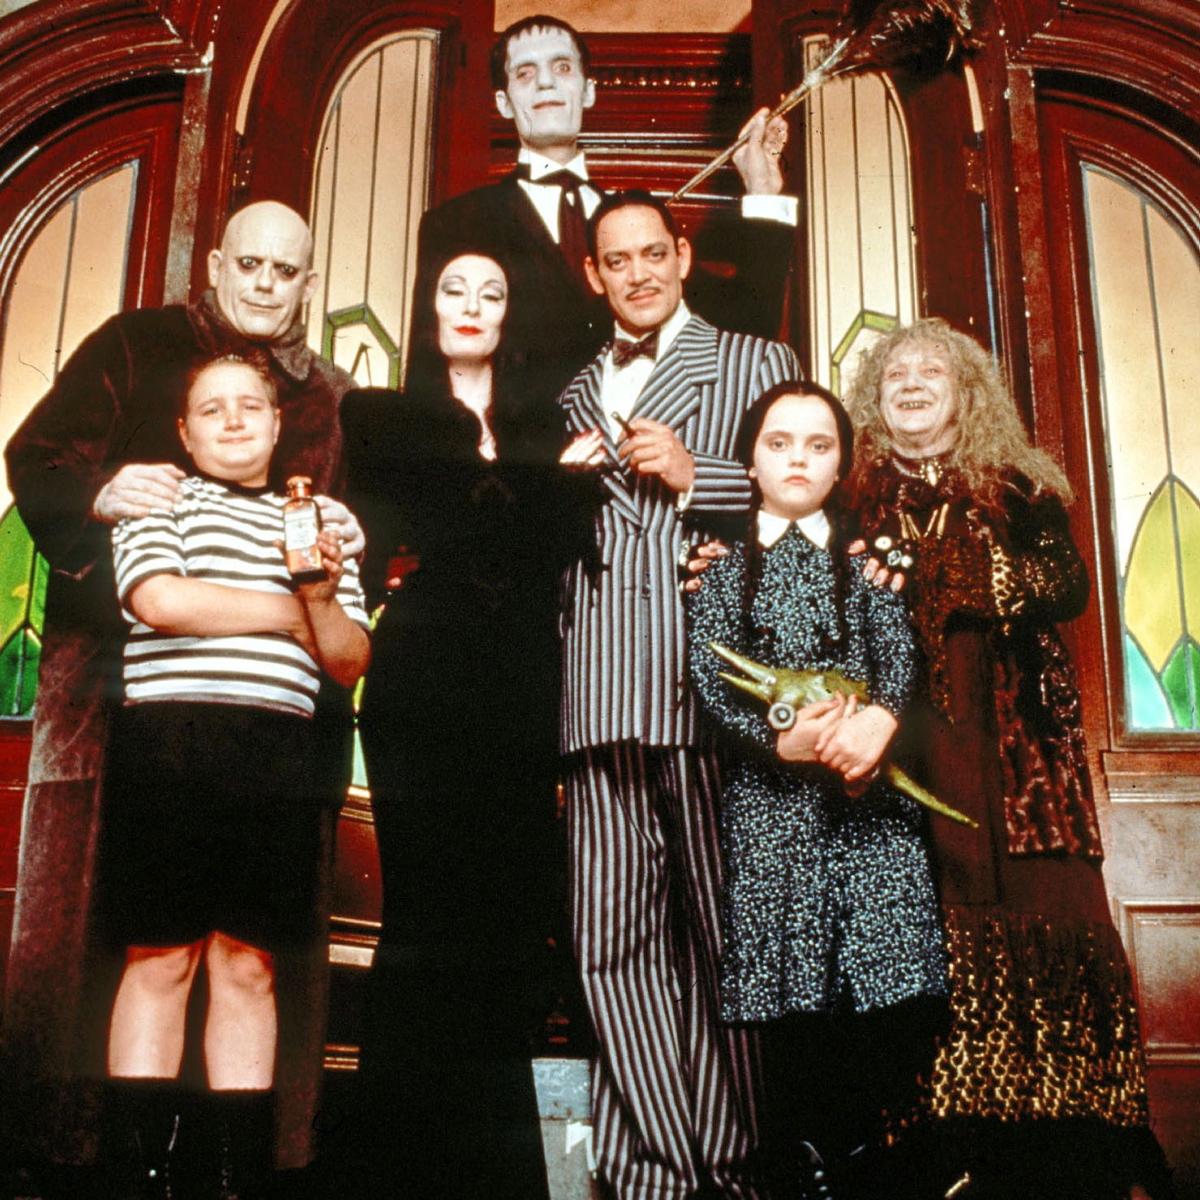 The Addams Family #4